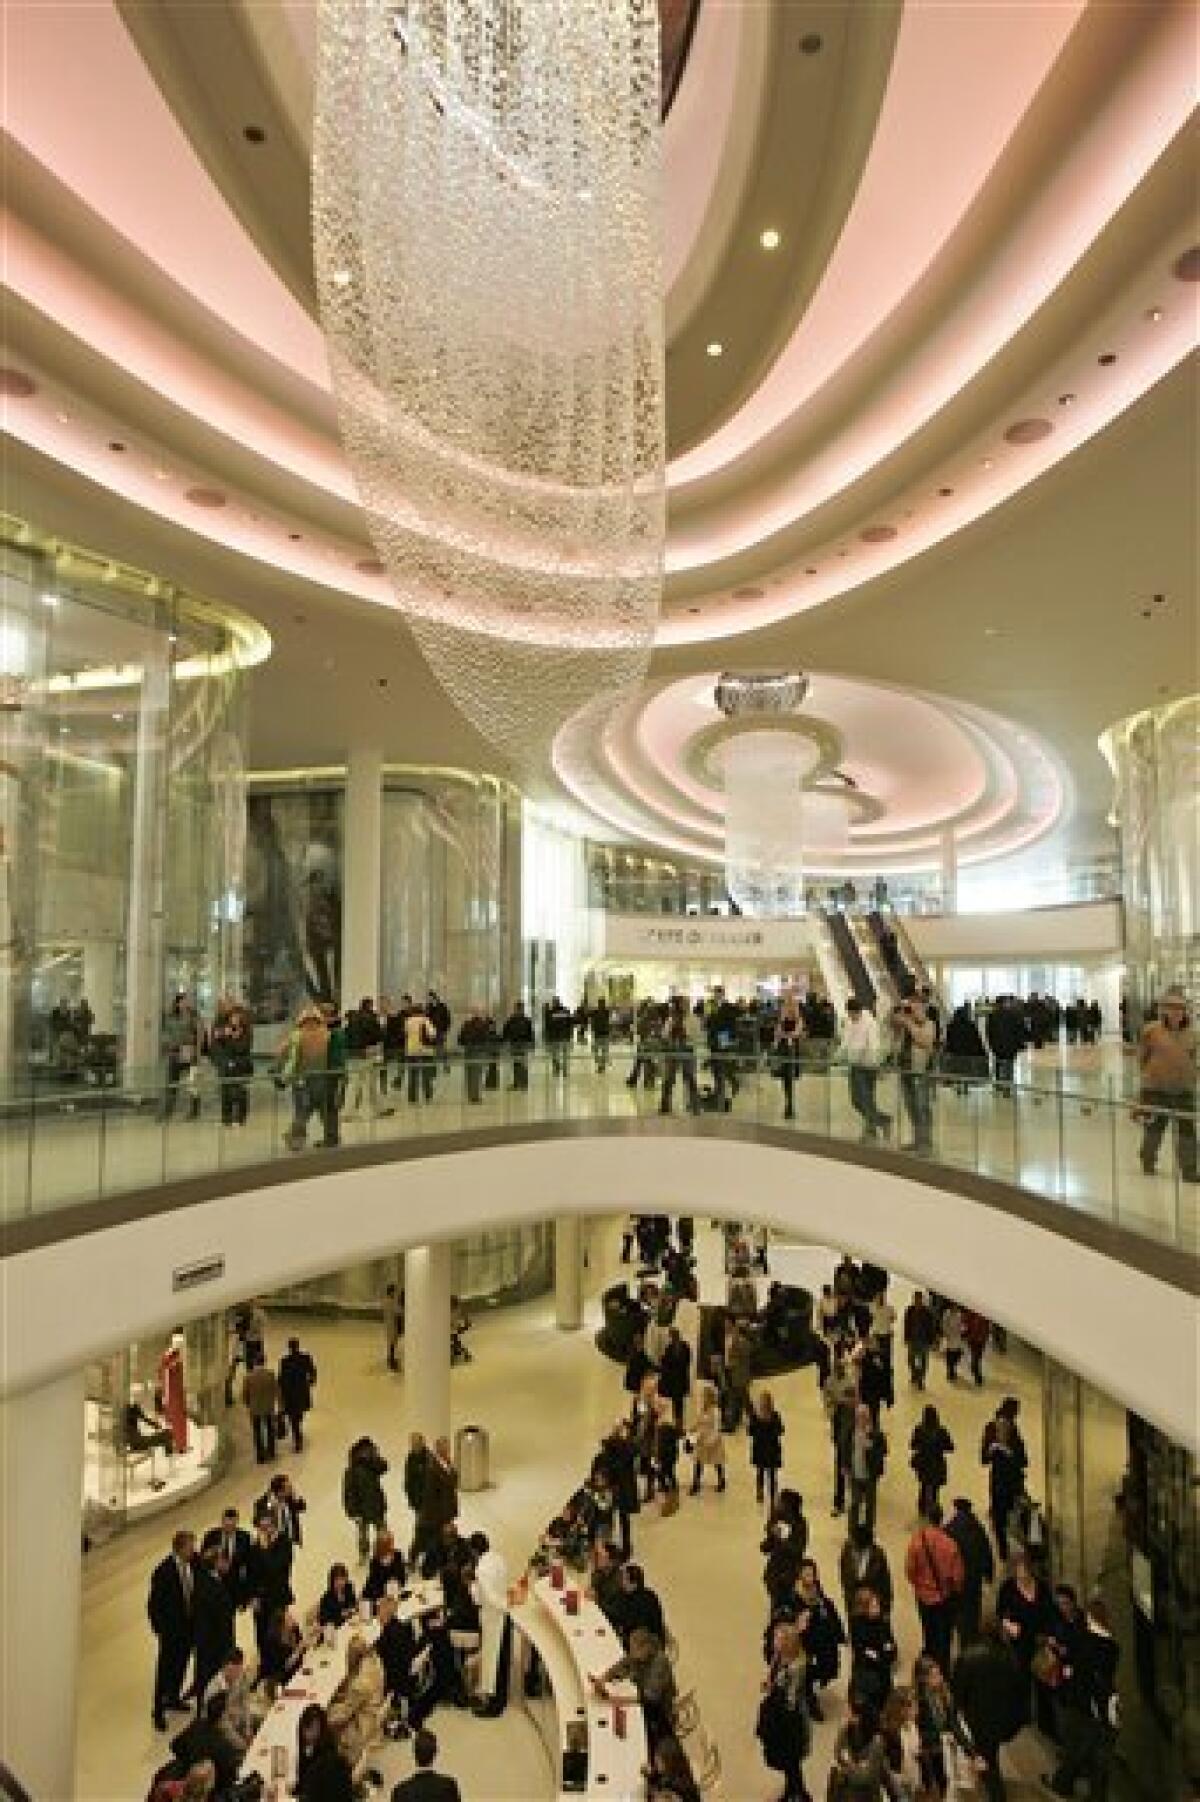 Thousands throng to opening of huge London mall - The San Diego